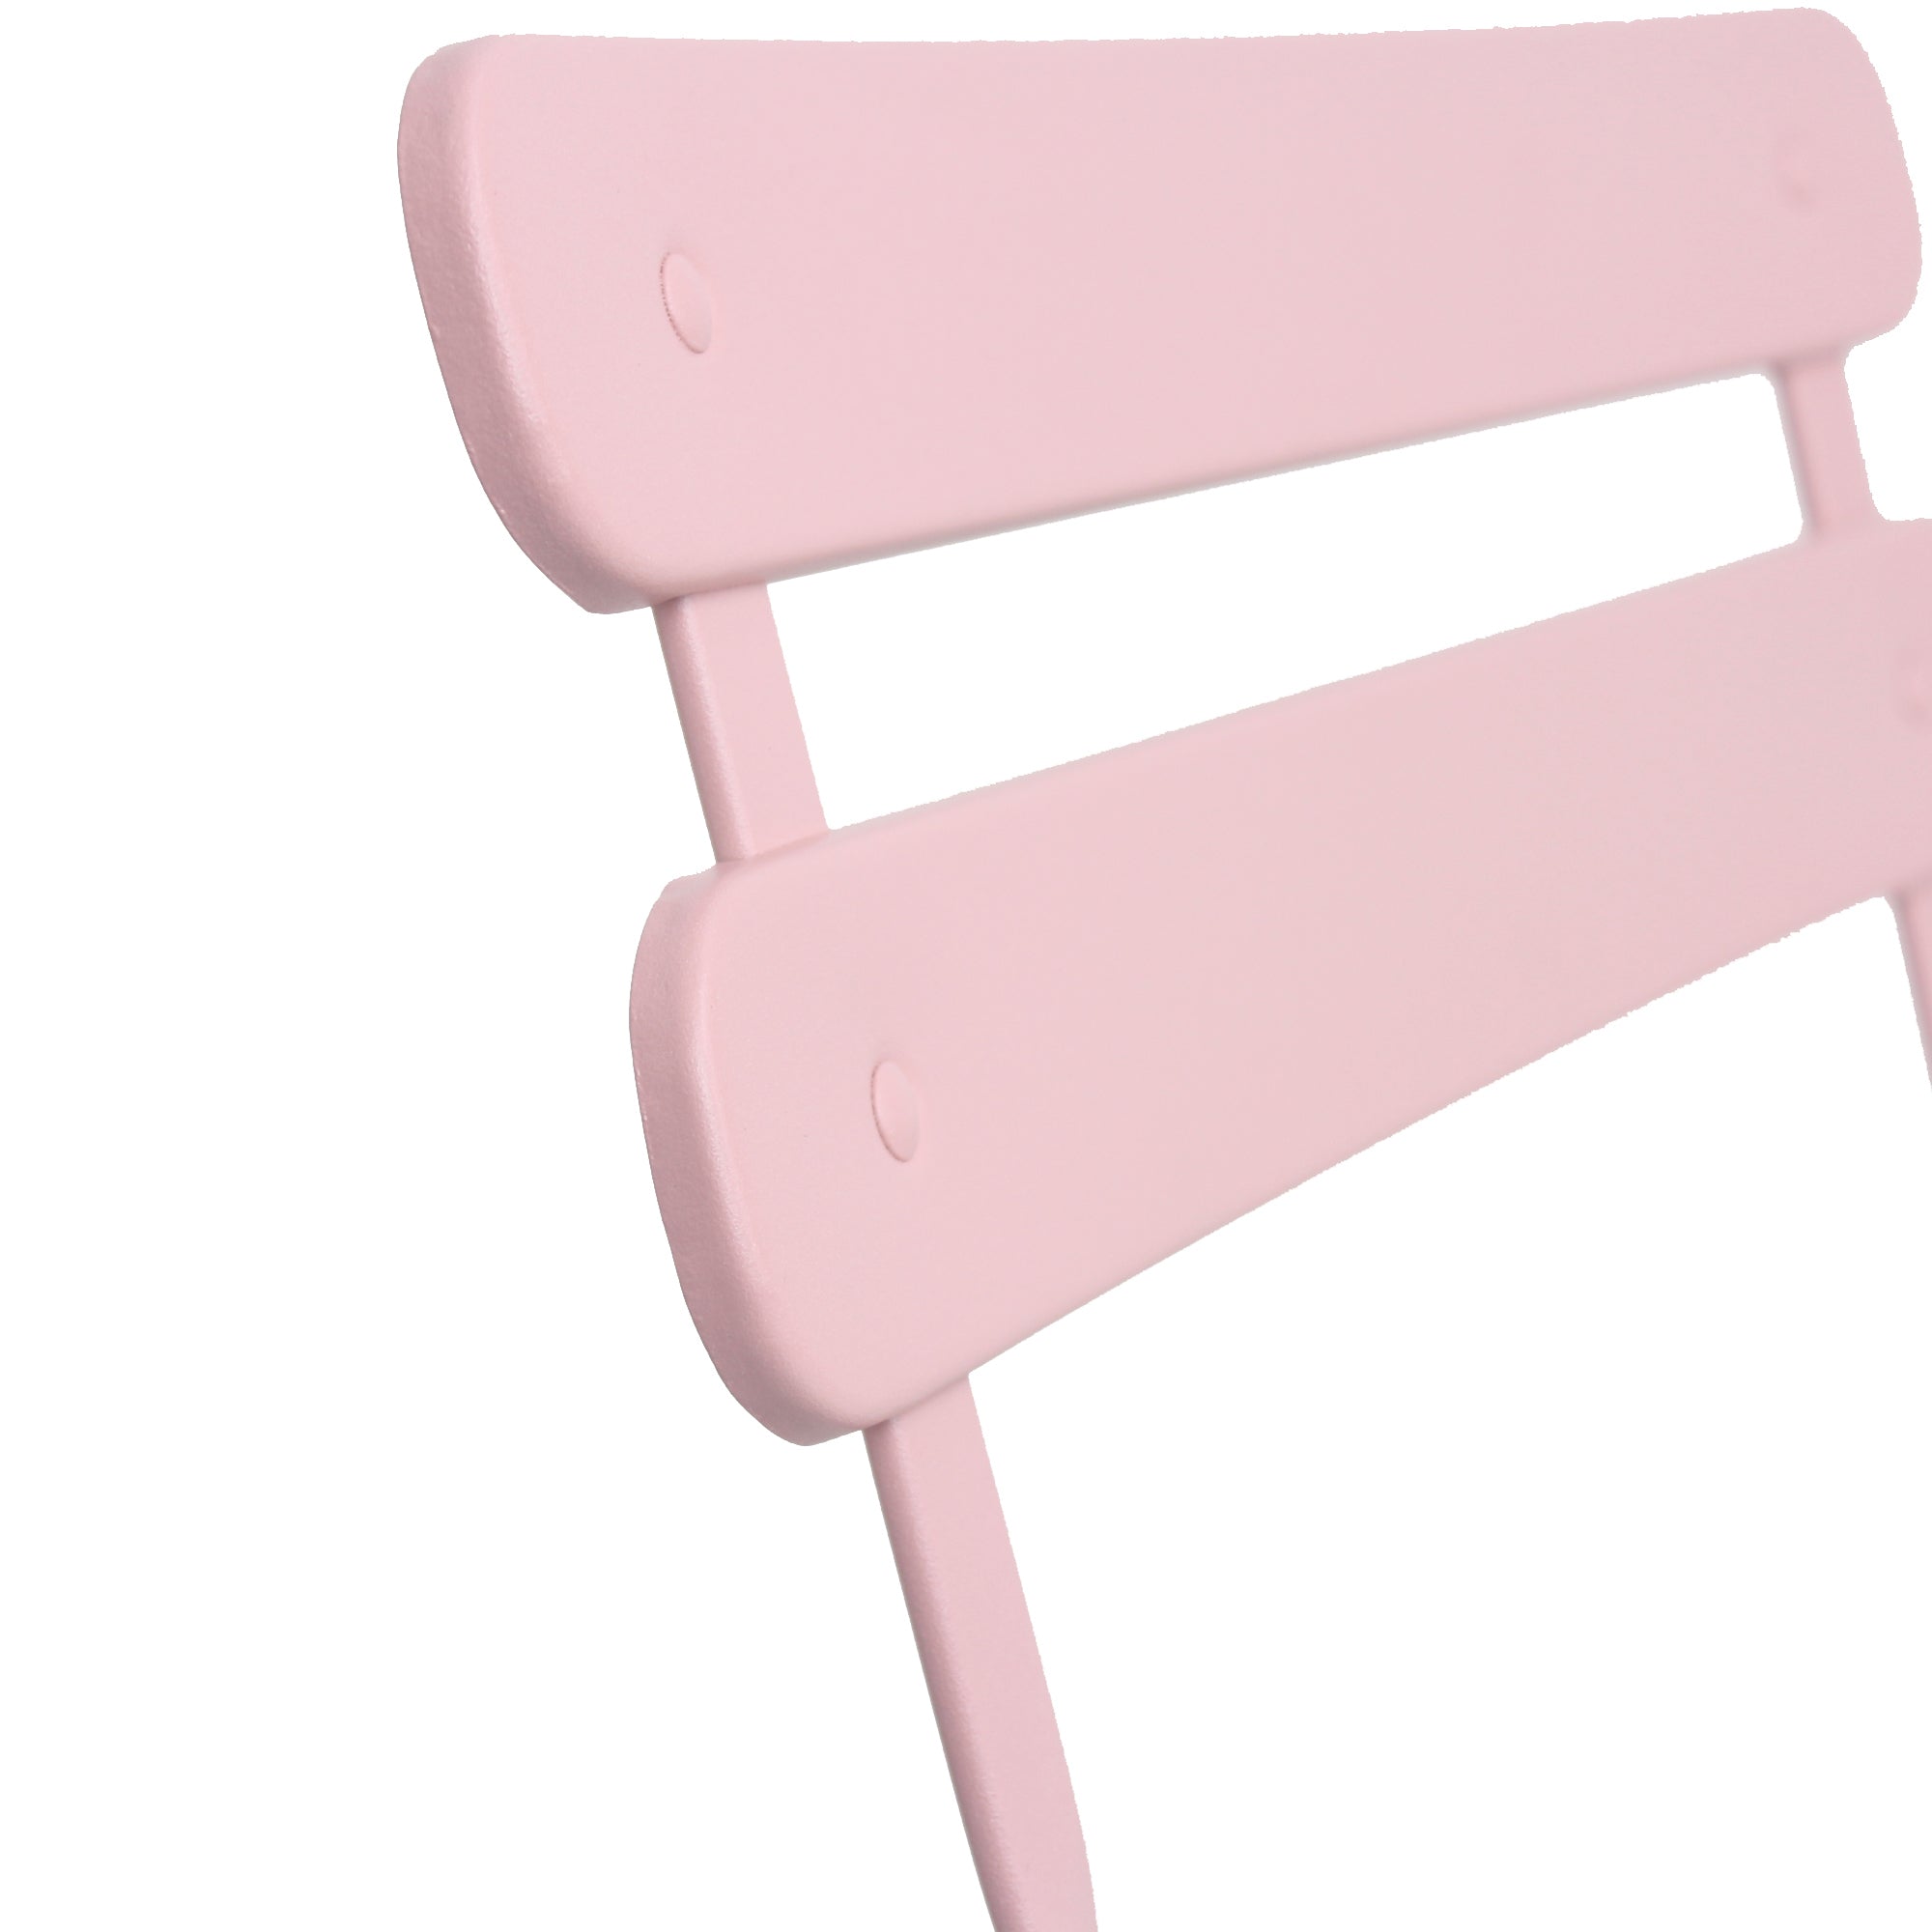 3 Pieces Patio Bistro Balcony Metal Chair Table Set-Pink